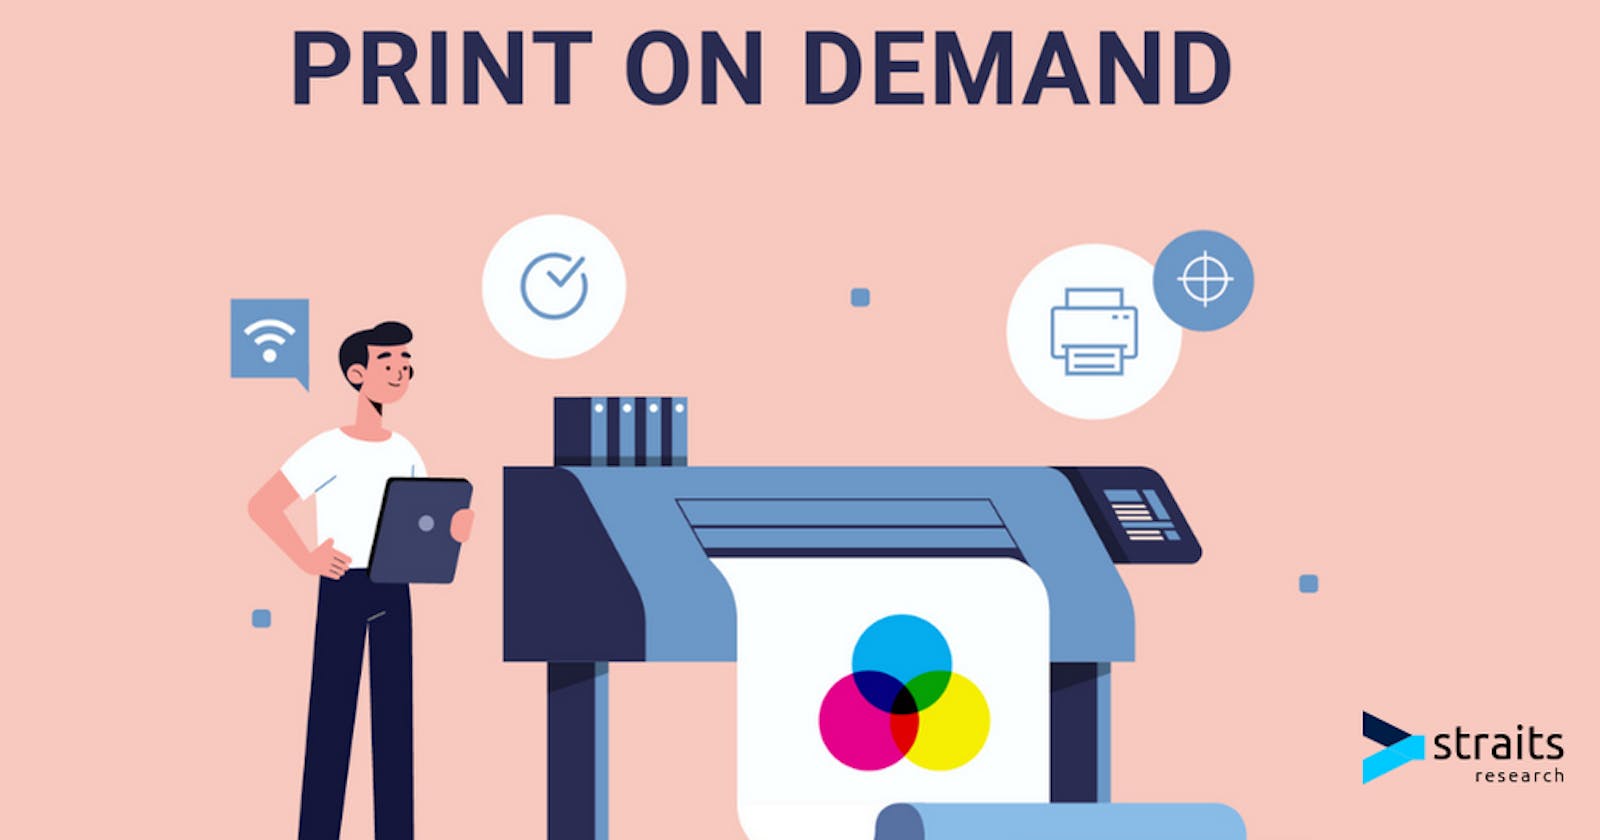 The Future of Retail is Print on Demand: How Digital Technology and POD are Transforming the Way Businesses Operate and Meet Customer Needs